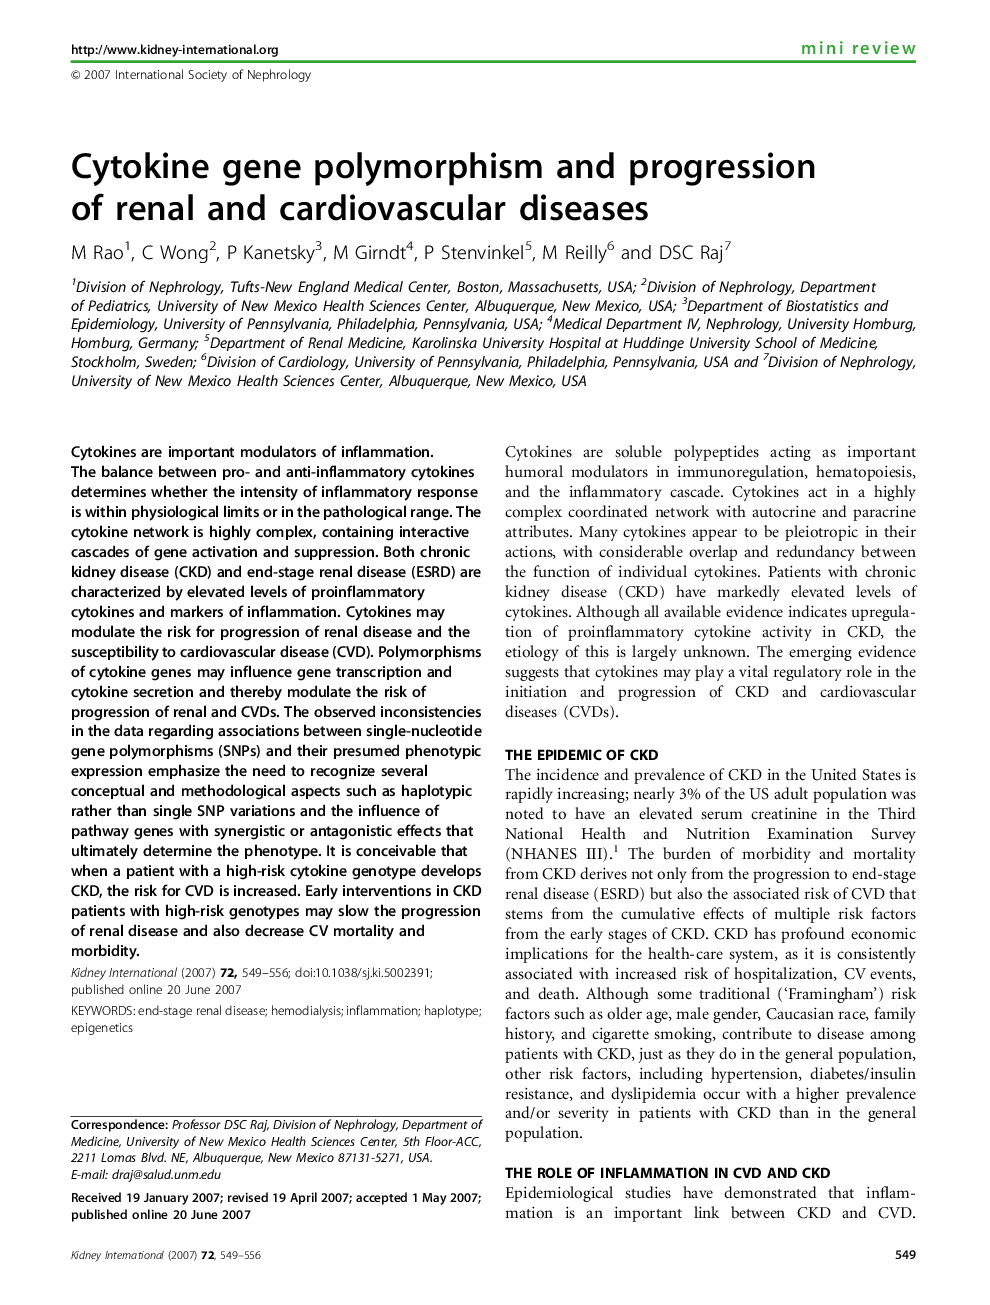 Cytokine gene polymorphism and progression of renal and cardiovascular diseases